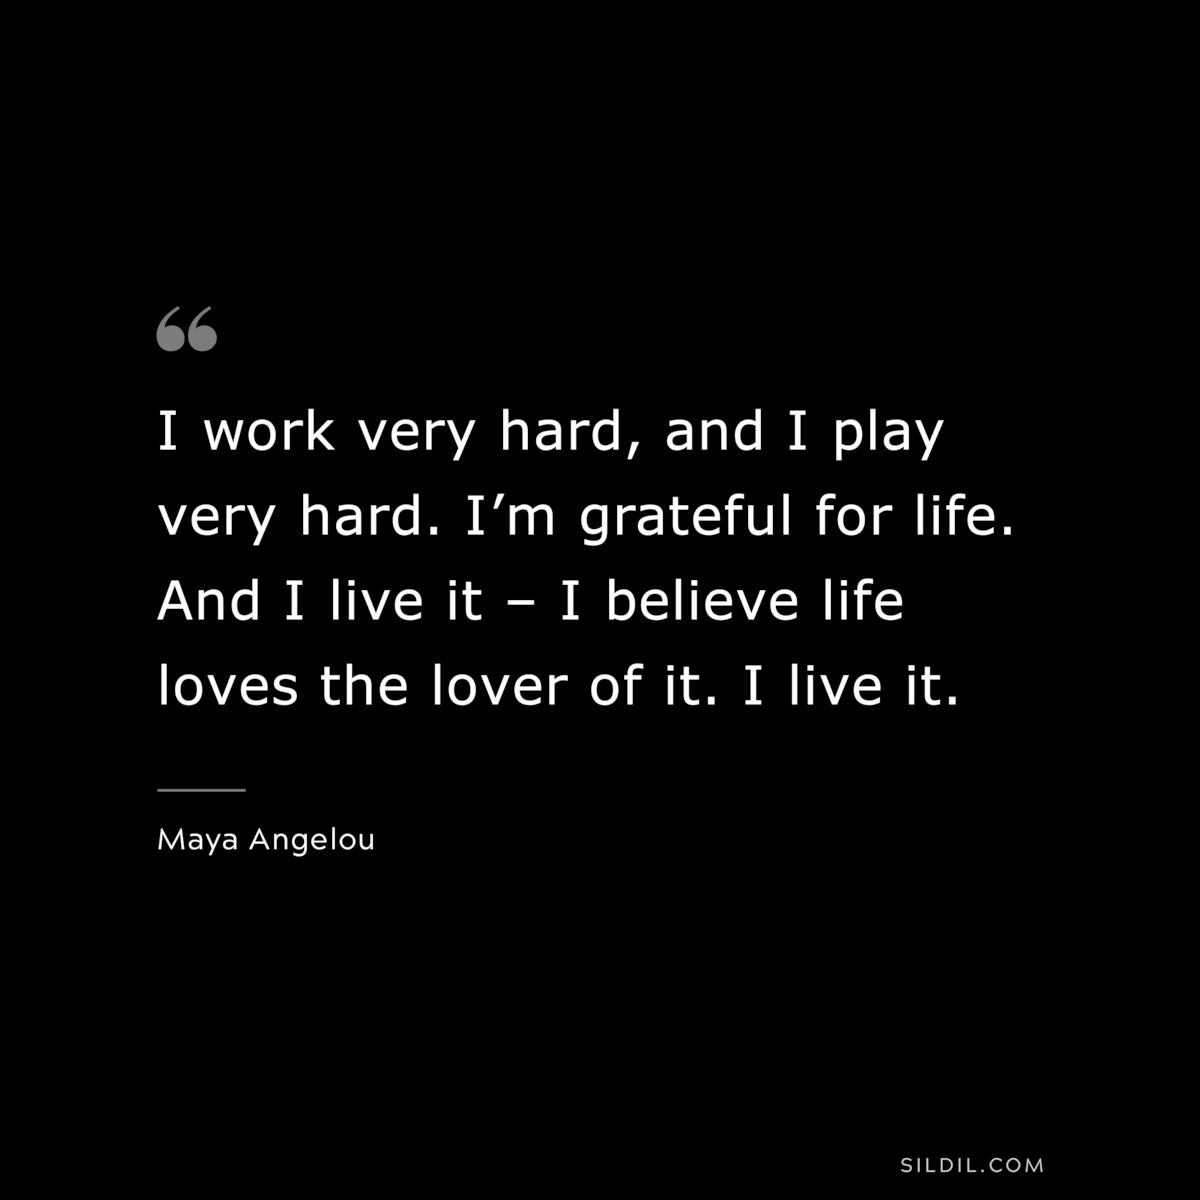 I work very hard, and I play very hard. I’m grateful for life. And I live it – I believe life loves the lover of it. I live it. ― Maya Angelou